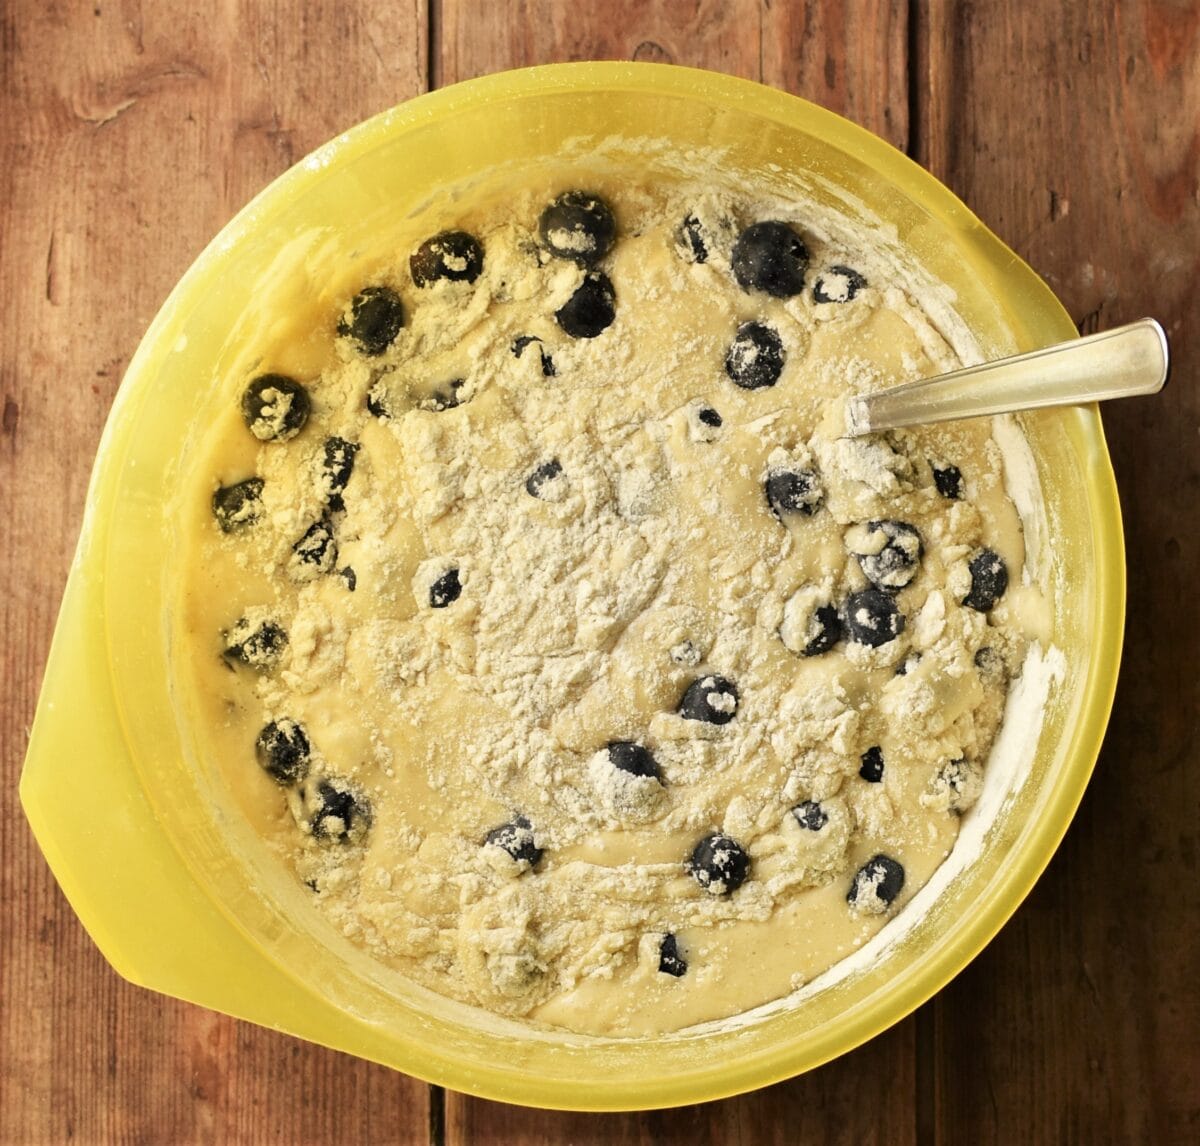 Blueberry cake batter in yellow bowl with spoon.